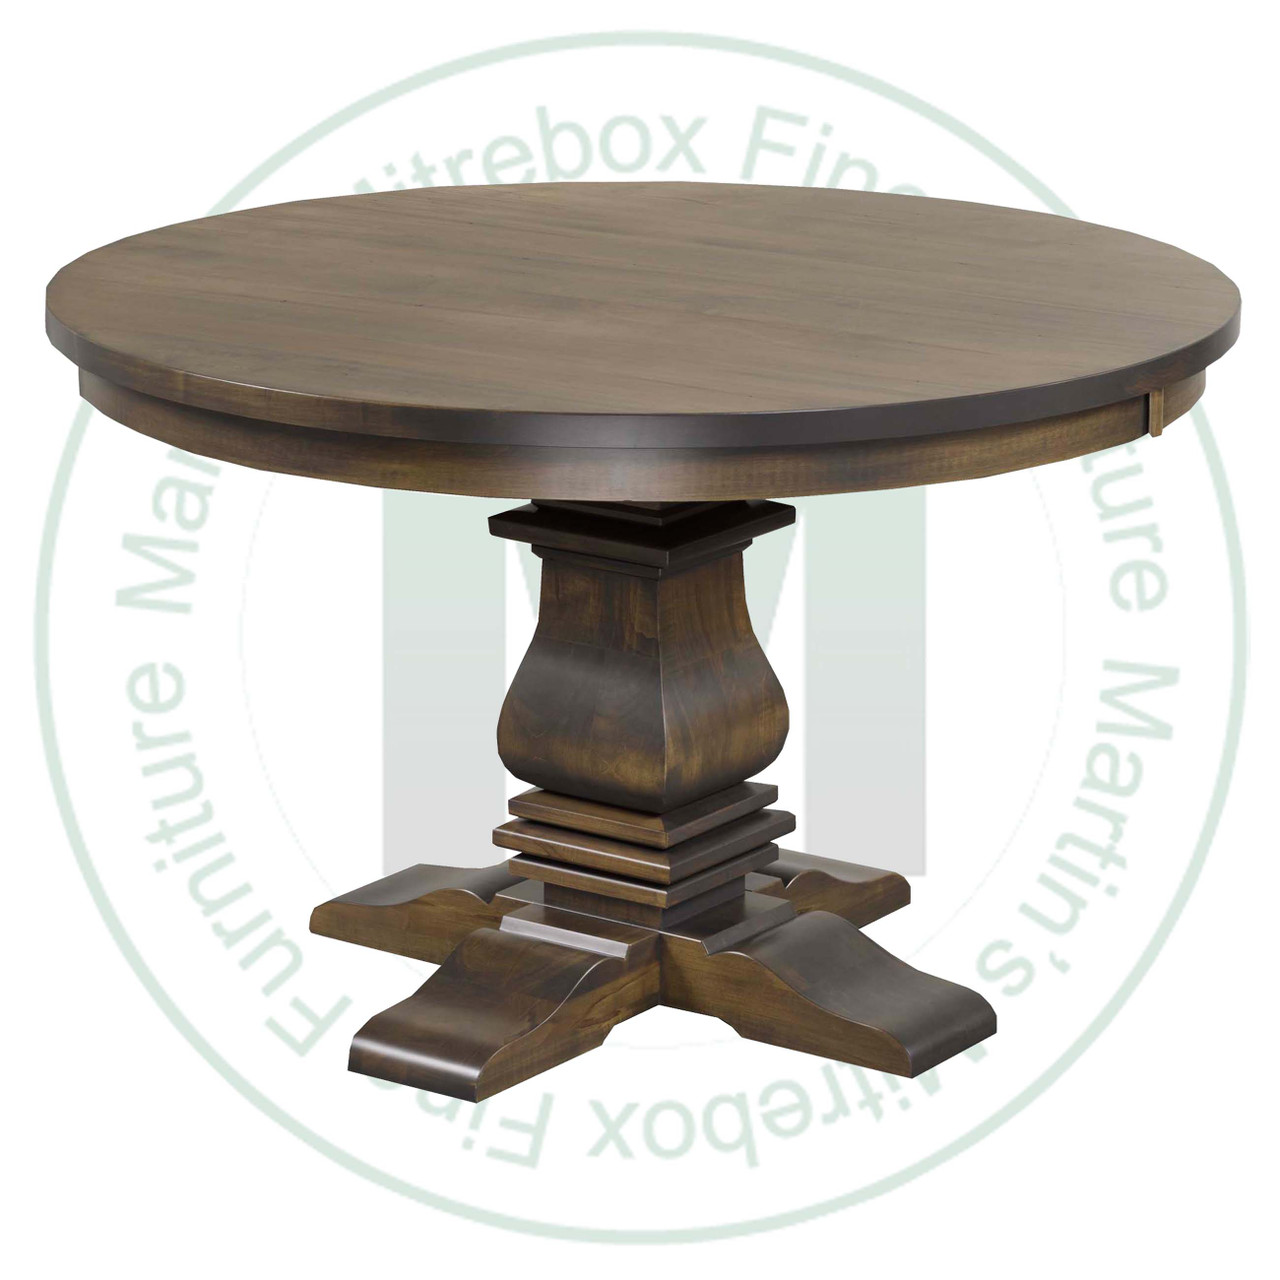 Maple Spartan Collection Single Pedestal Table 60''D x 60''W x 30''H With 2 - 12'' Leaves. Table Has 1'' Thick Top